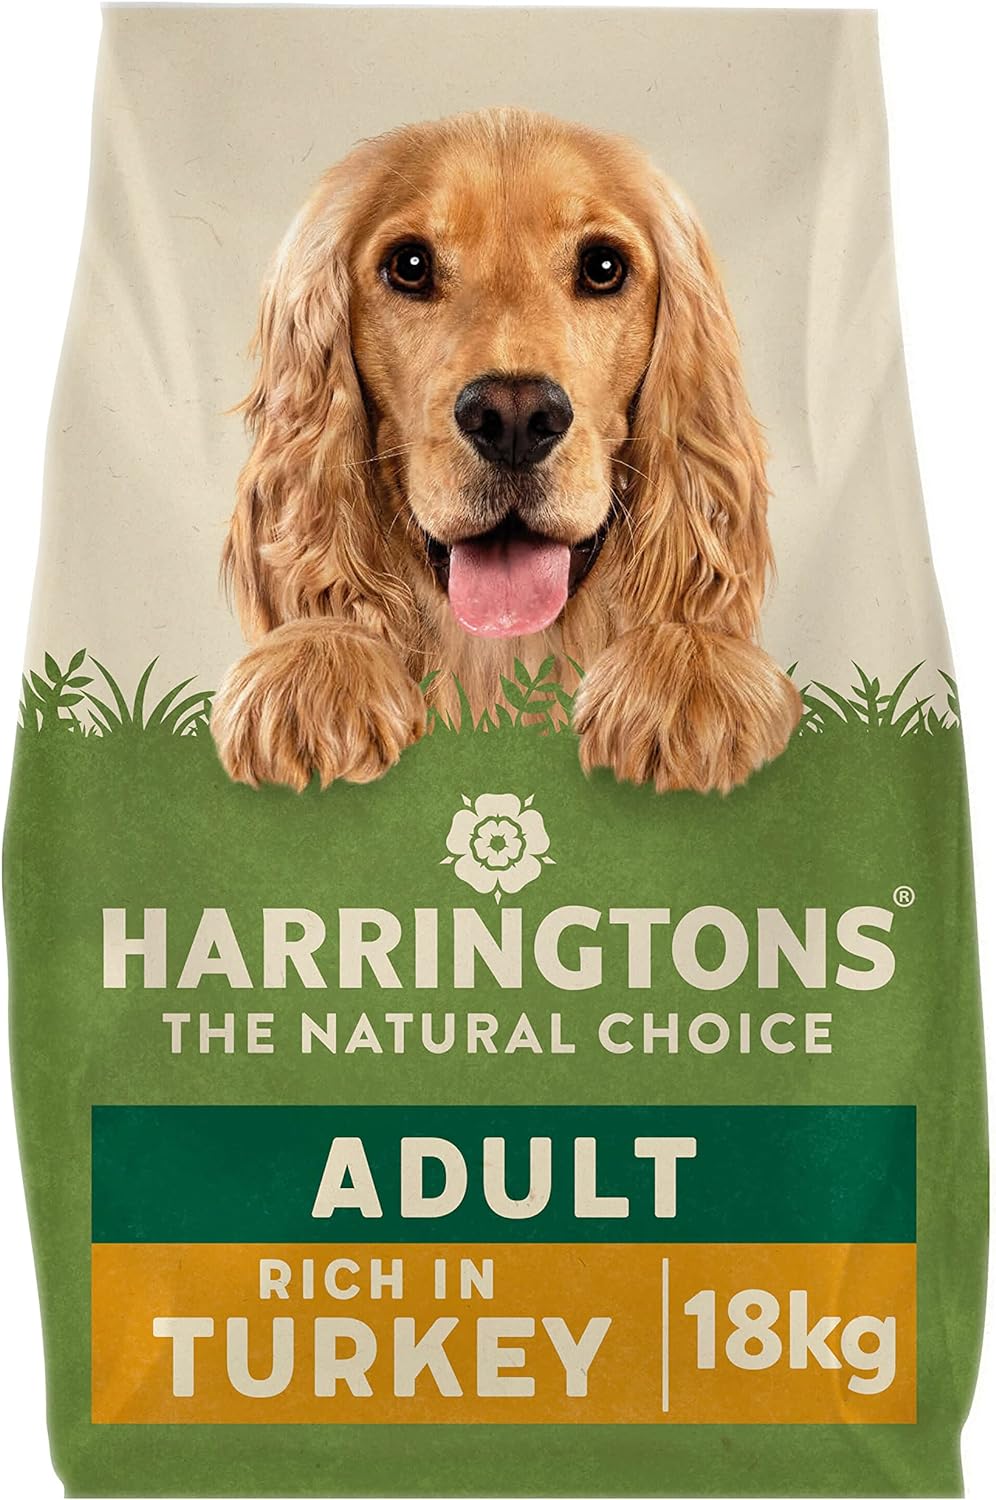 Harringtons Complete Dry Adult Dog Food Turkey & Veg 18kg - Made with All Natural Ingredients?COST308072